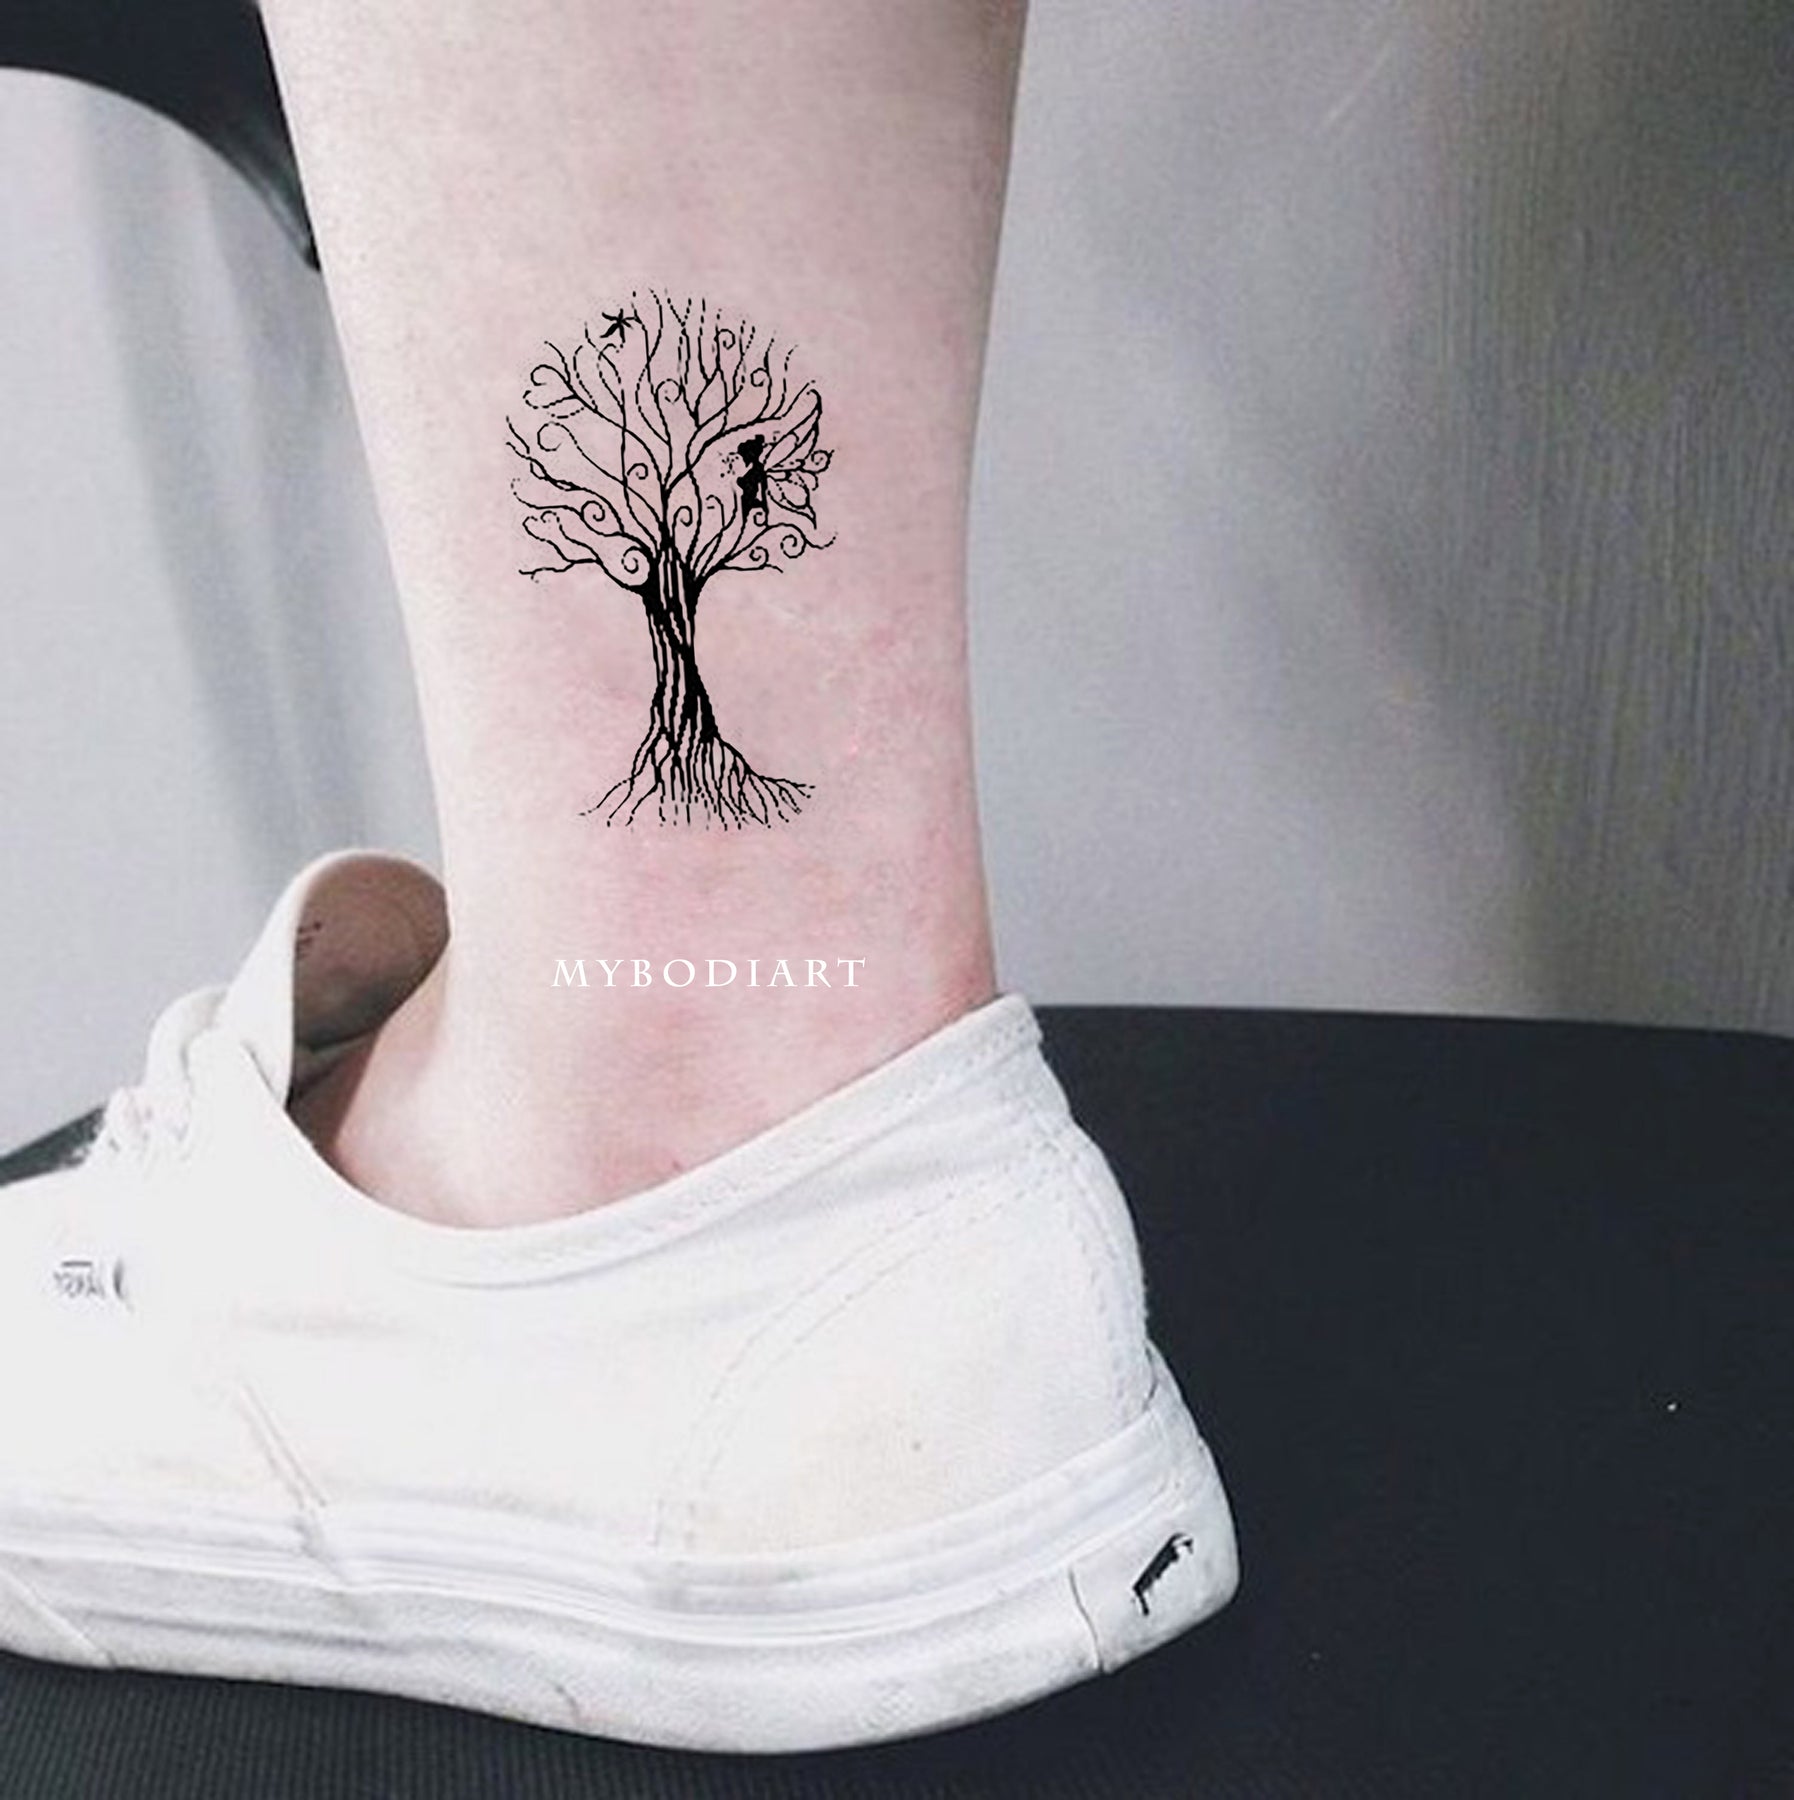 Dark Age Tattoo Studio  Cute little Palm Tree  done by nyimaink   Facebook